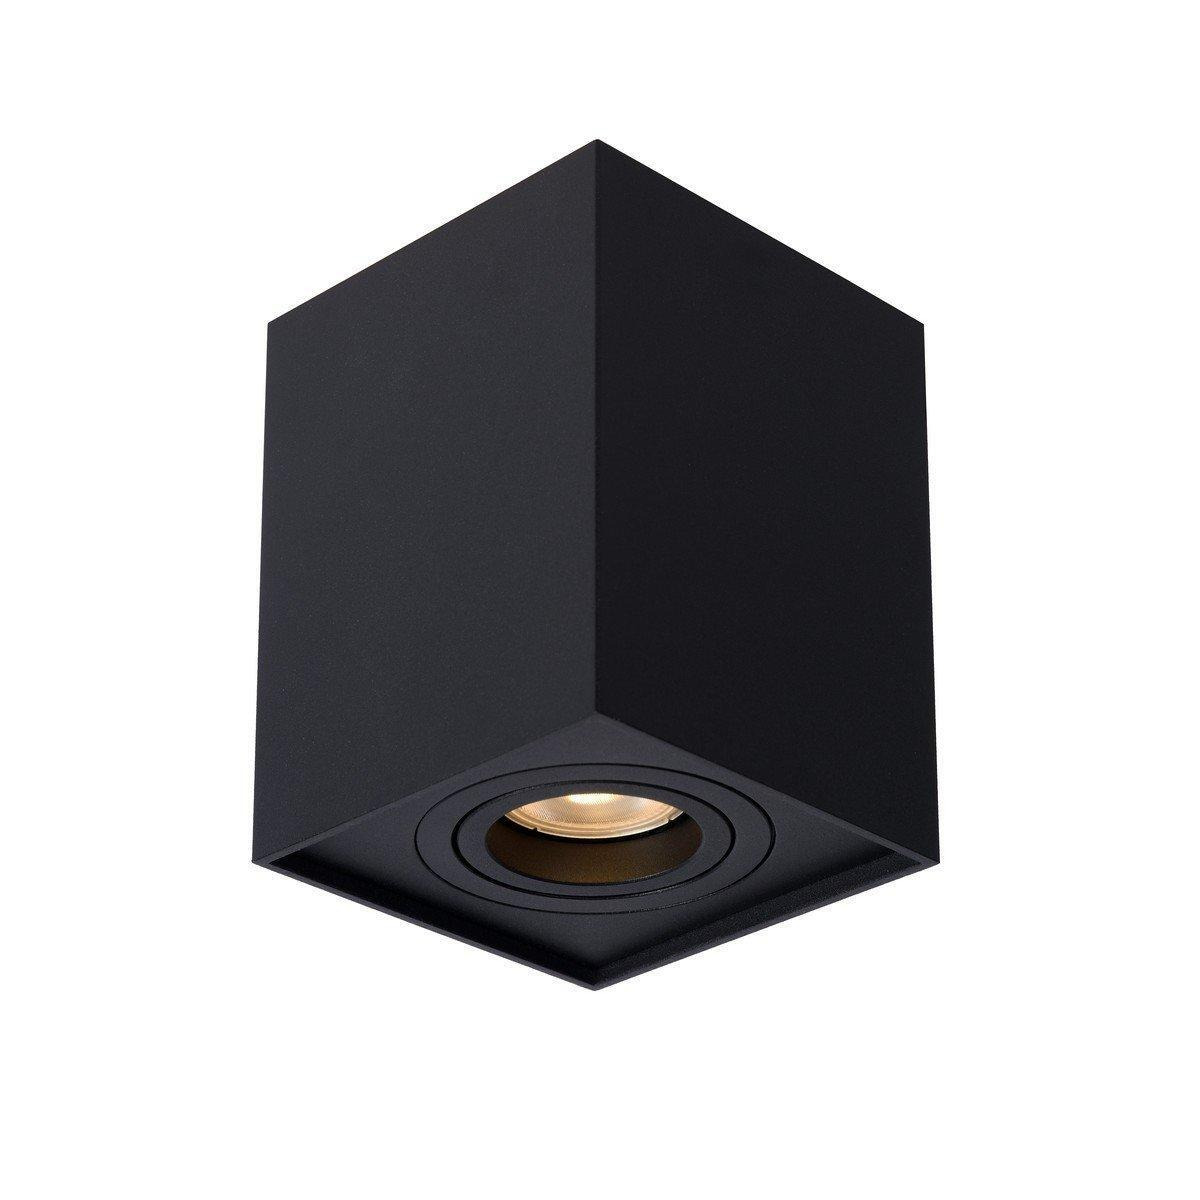 'TUBE' Dimmable Tiltable Surface Mounted Ceiling Spotlight 1xGU10 - image 1